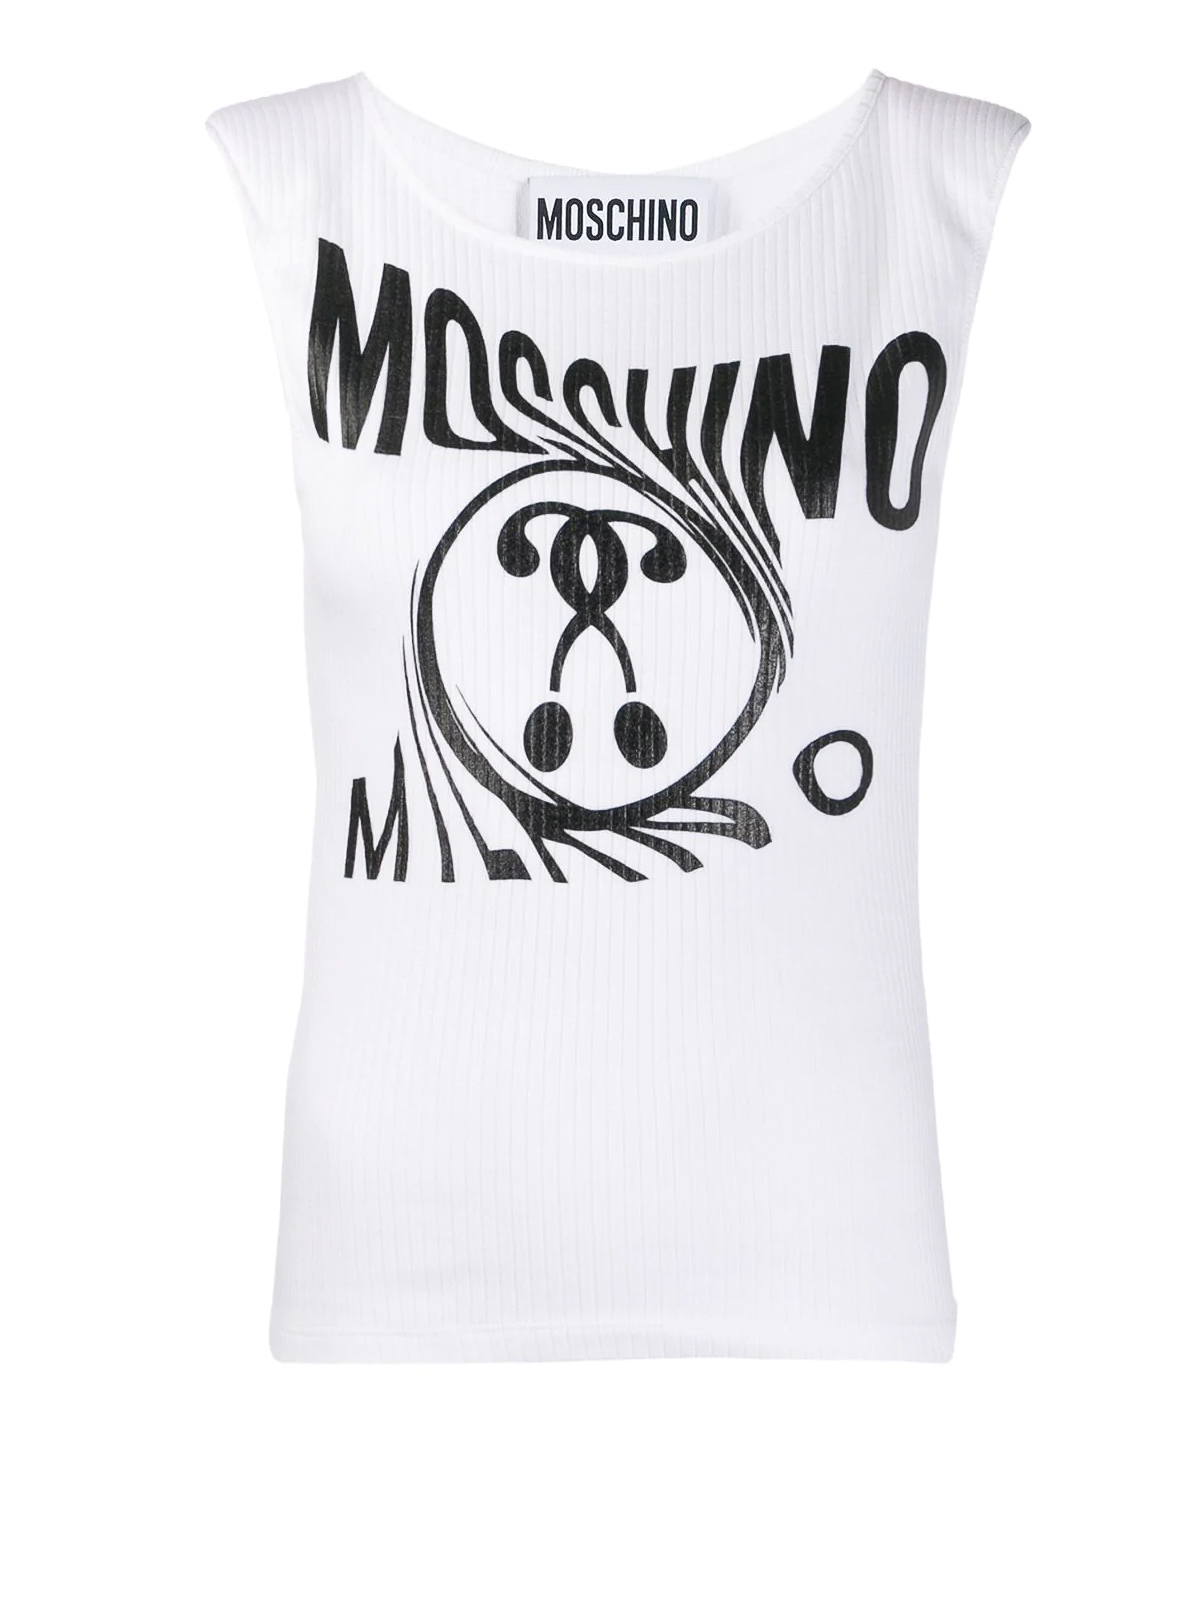 MOSCHINO DISTORTED DOUBLE QUESTION MARK TOP